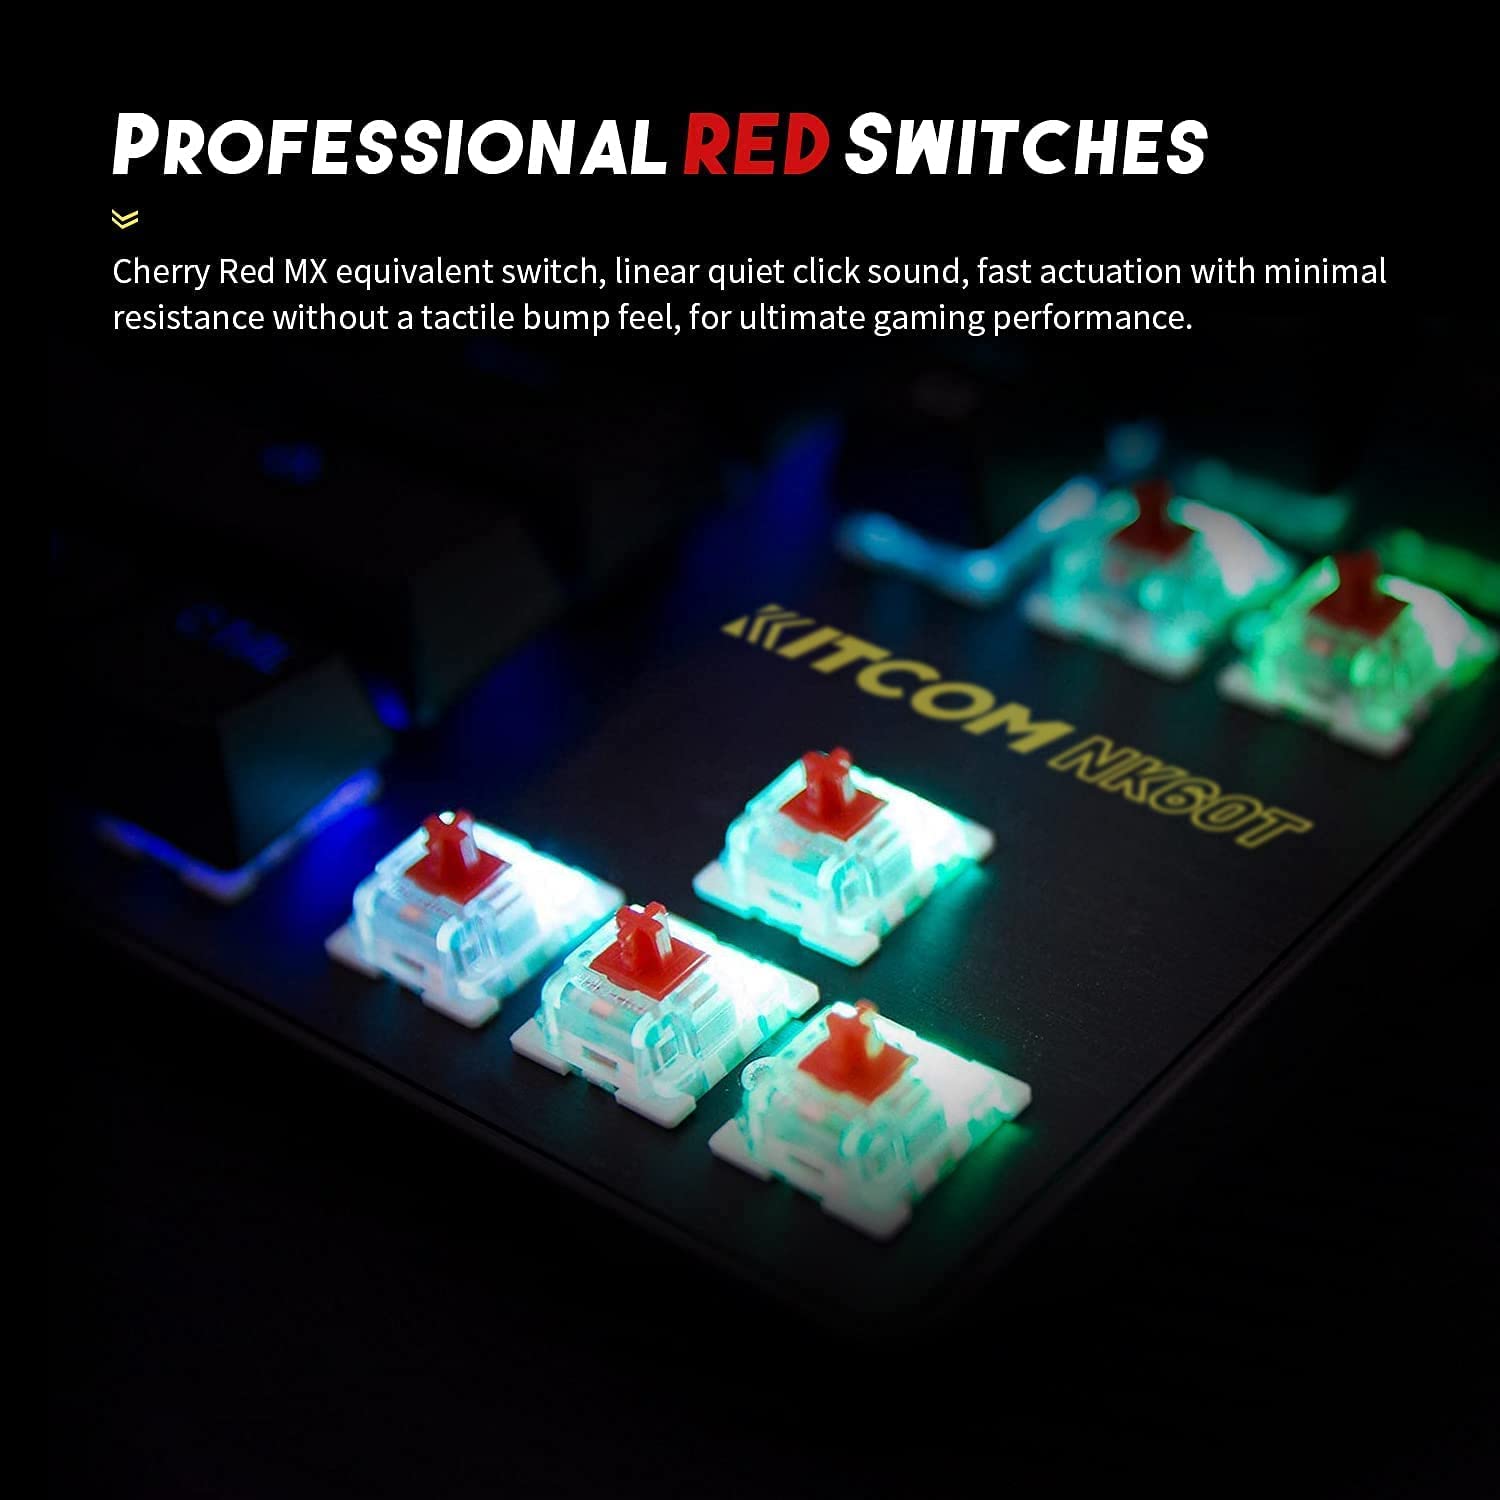 Gaming Keyboard Mechanical 87 Key Silent Red Switch, KITCOM TKL RGB NKRO Backlit Per Key Double-Shot ABS keycaps Programmable Macro Detachable Type-C Quiet Wired Keyboard for Windows Laptop PC NK60T